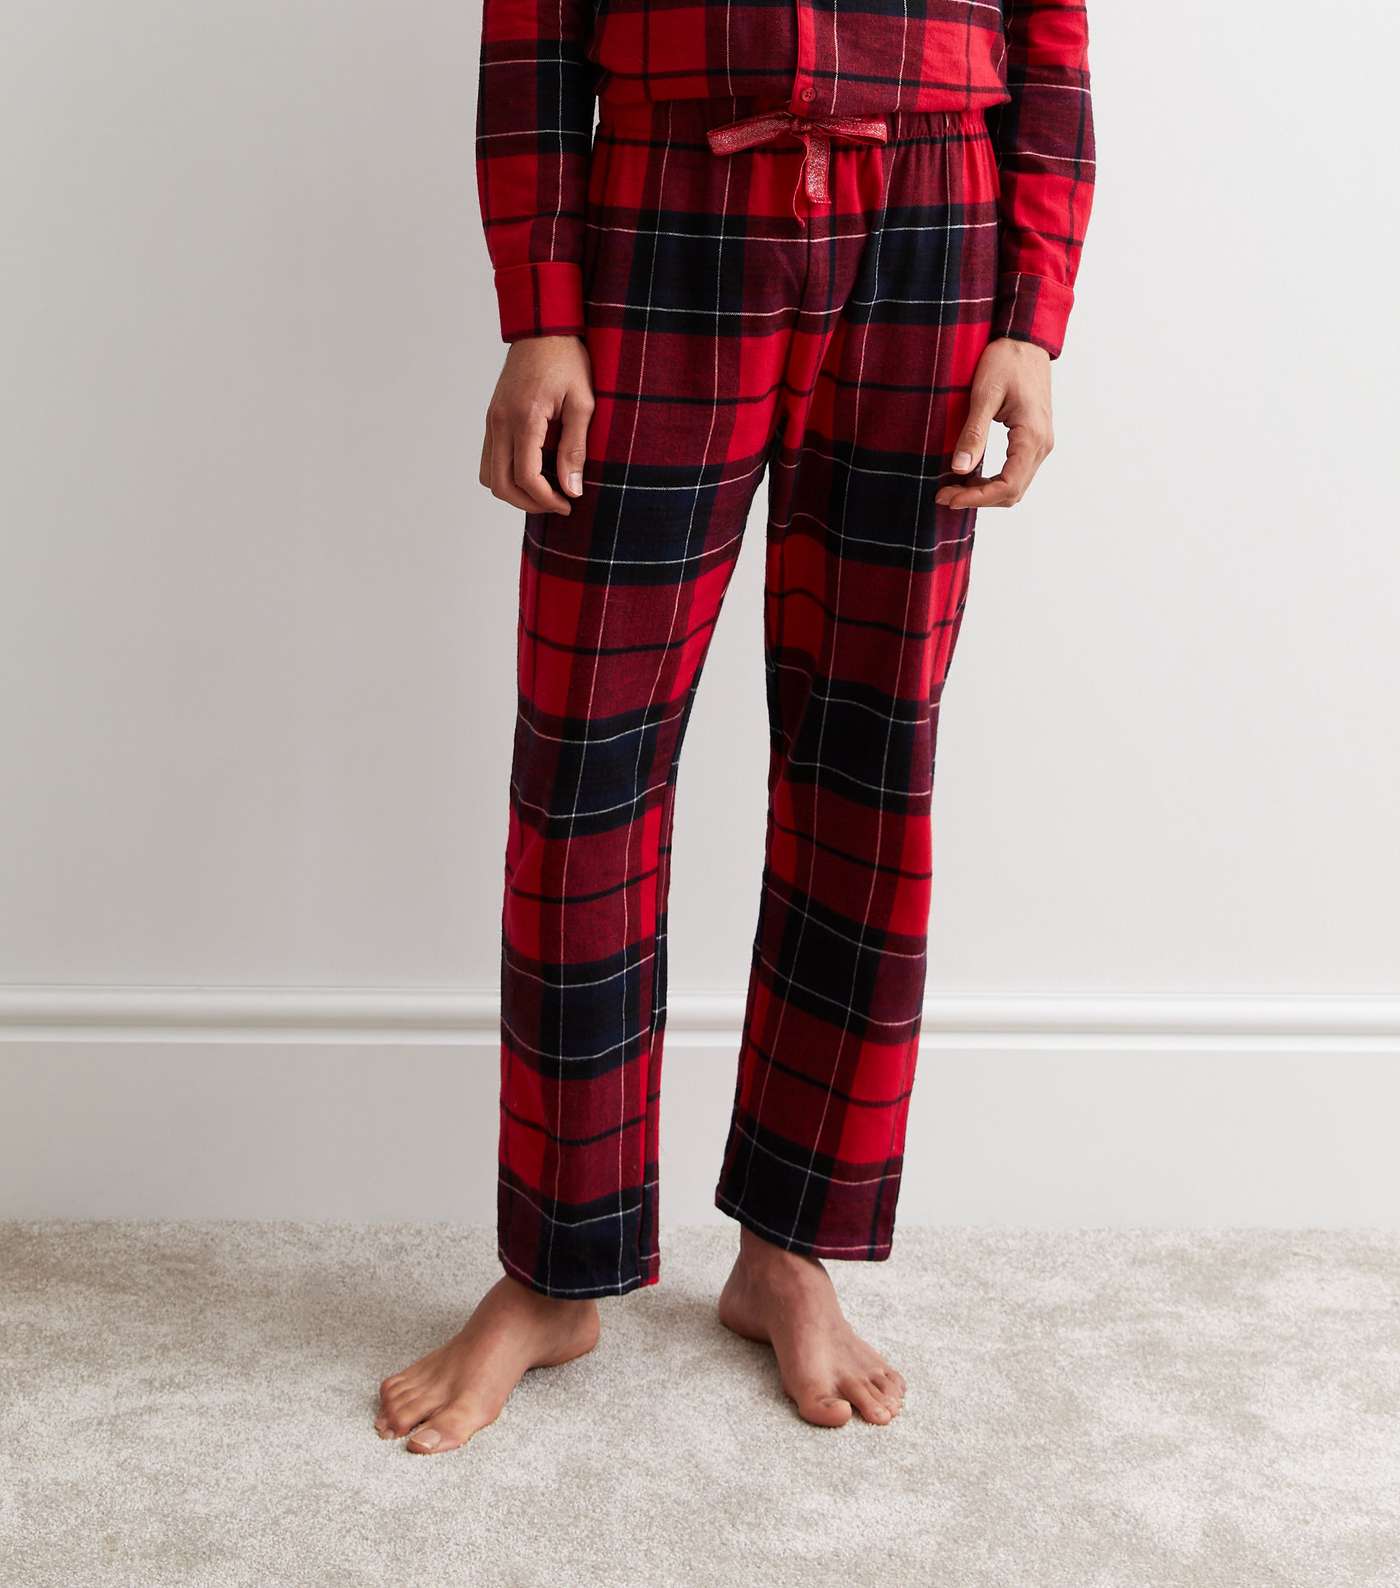 Red Trouser Family Christmas Pyjama Set with Check Pattern Image 5